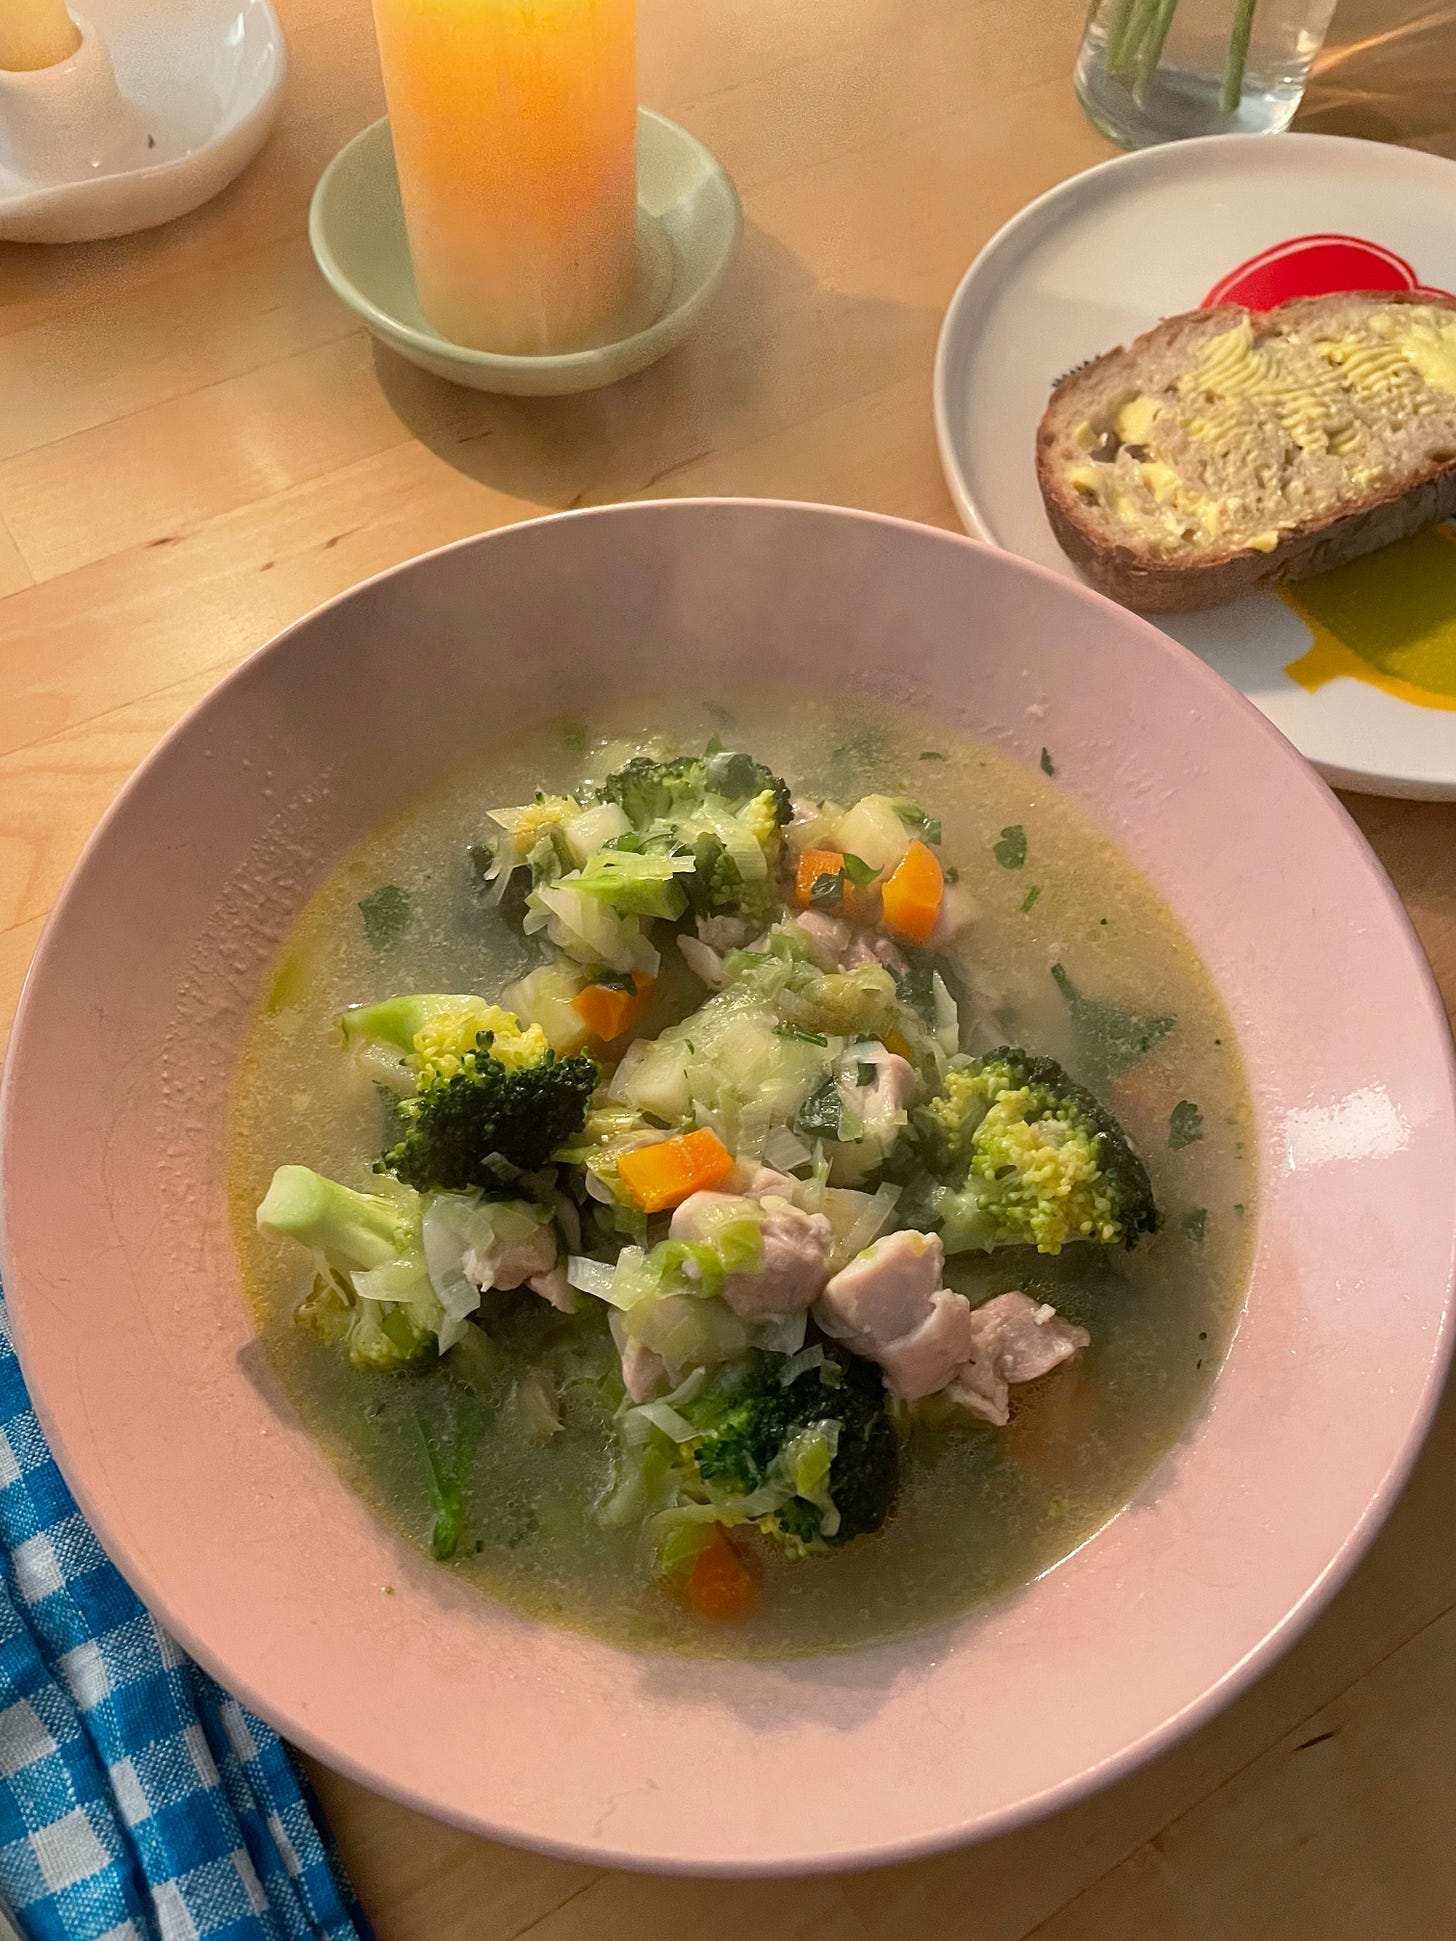 Bowl of chicken and vegetable soup in a pink bowl. It's steaming and there's a piece of buttered bread nearby and candles to light the table.